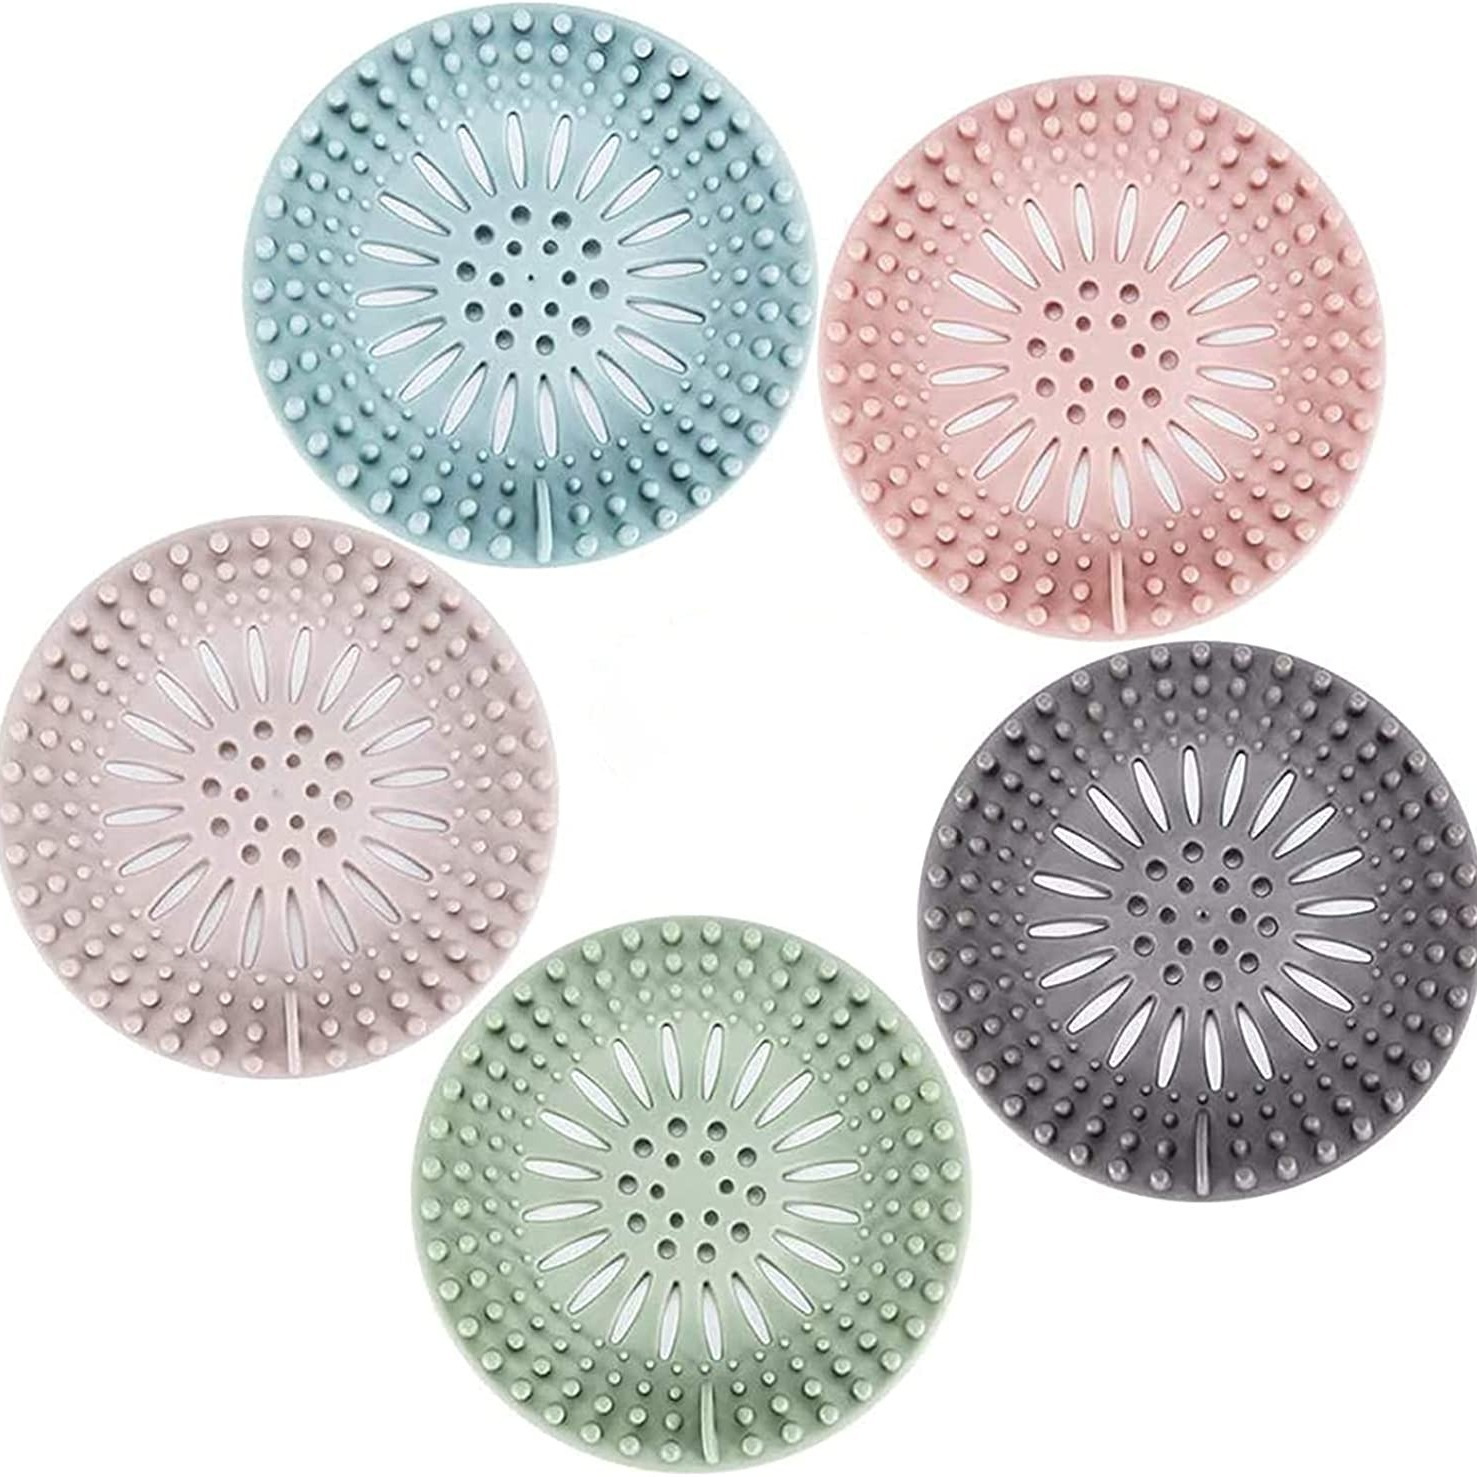 UMBWORLD Hair Catcher Silicone Hair Stopper Shower Drain Covers, Bathtub and Shower Drain Protectors with Suction Cups Suit for Bathroom Bathtub and K